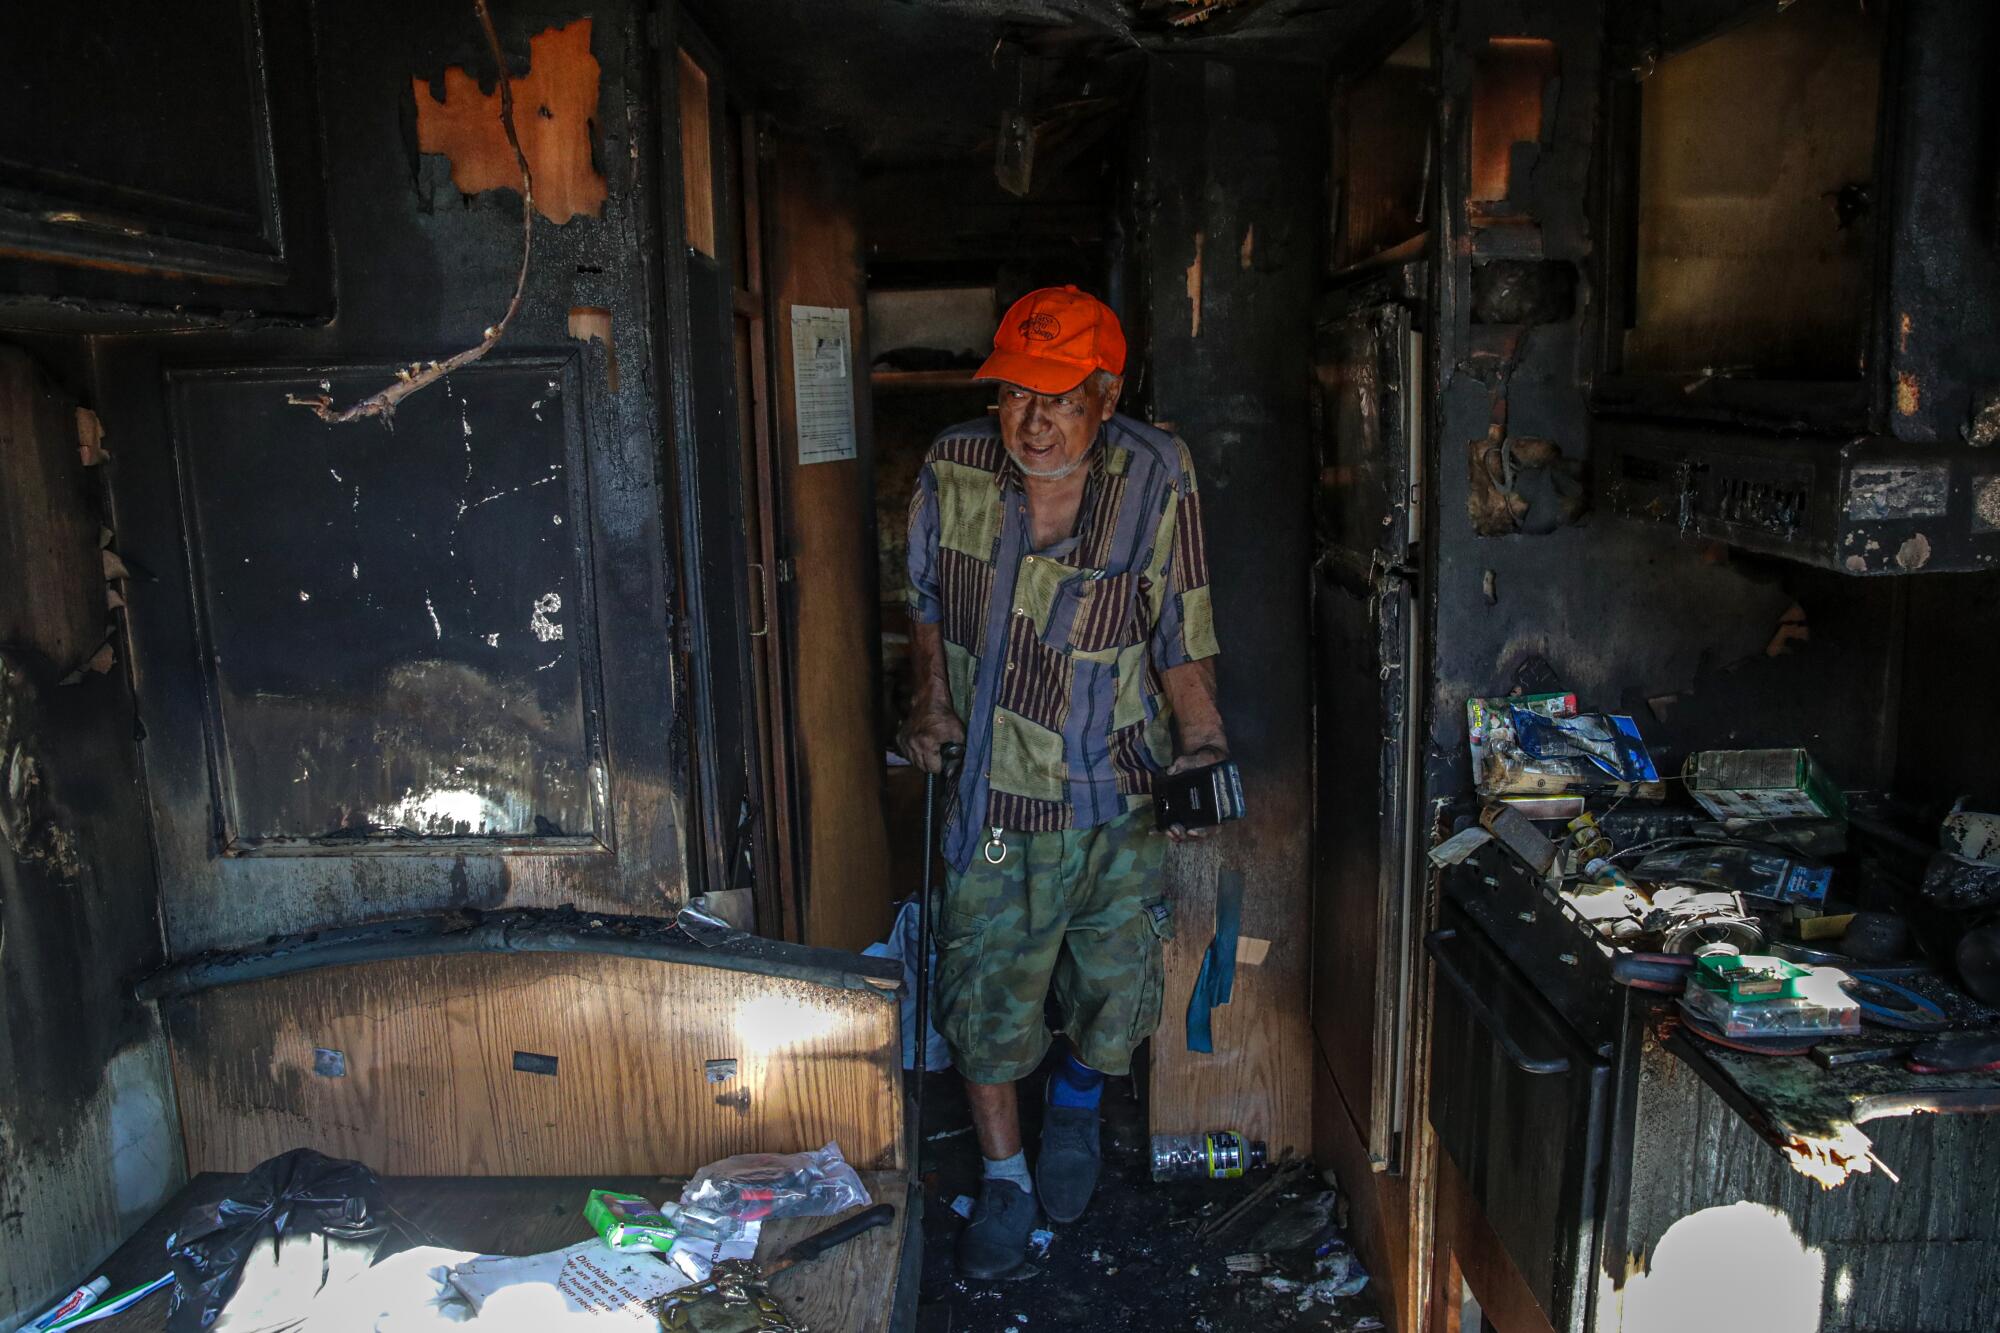 A person stands in a charred room.